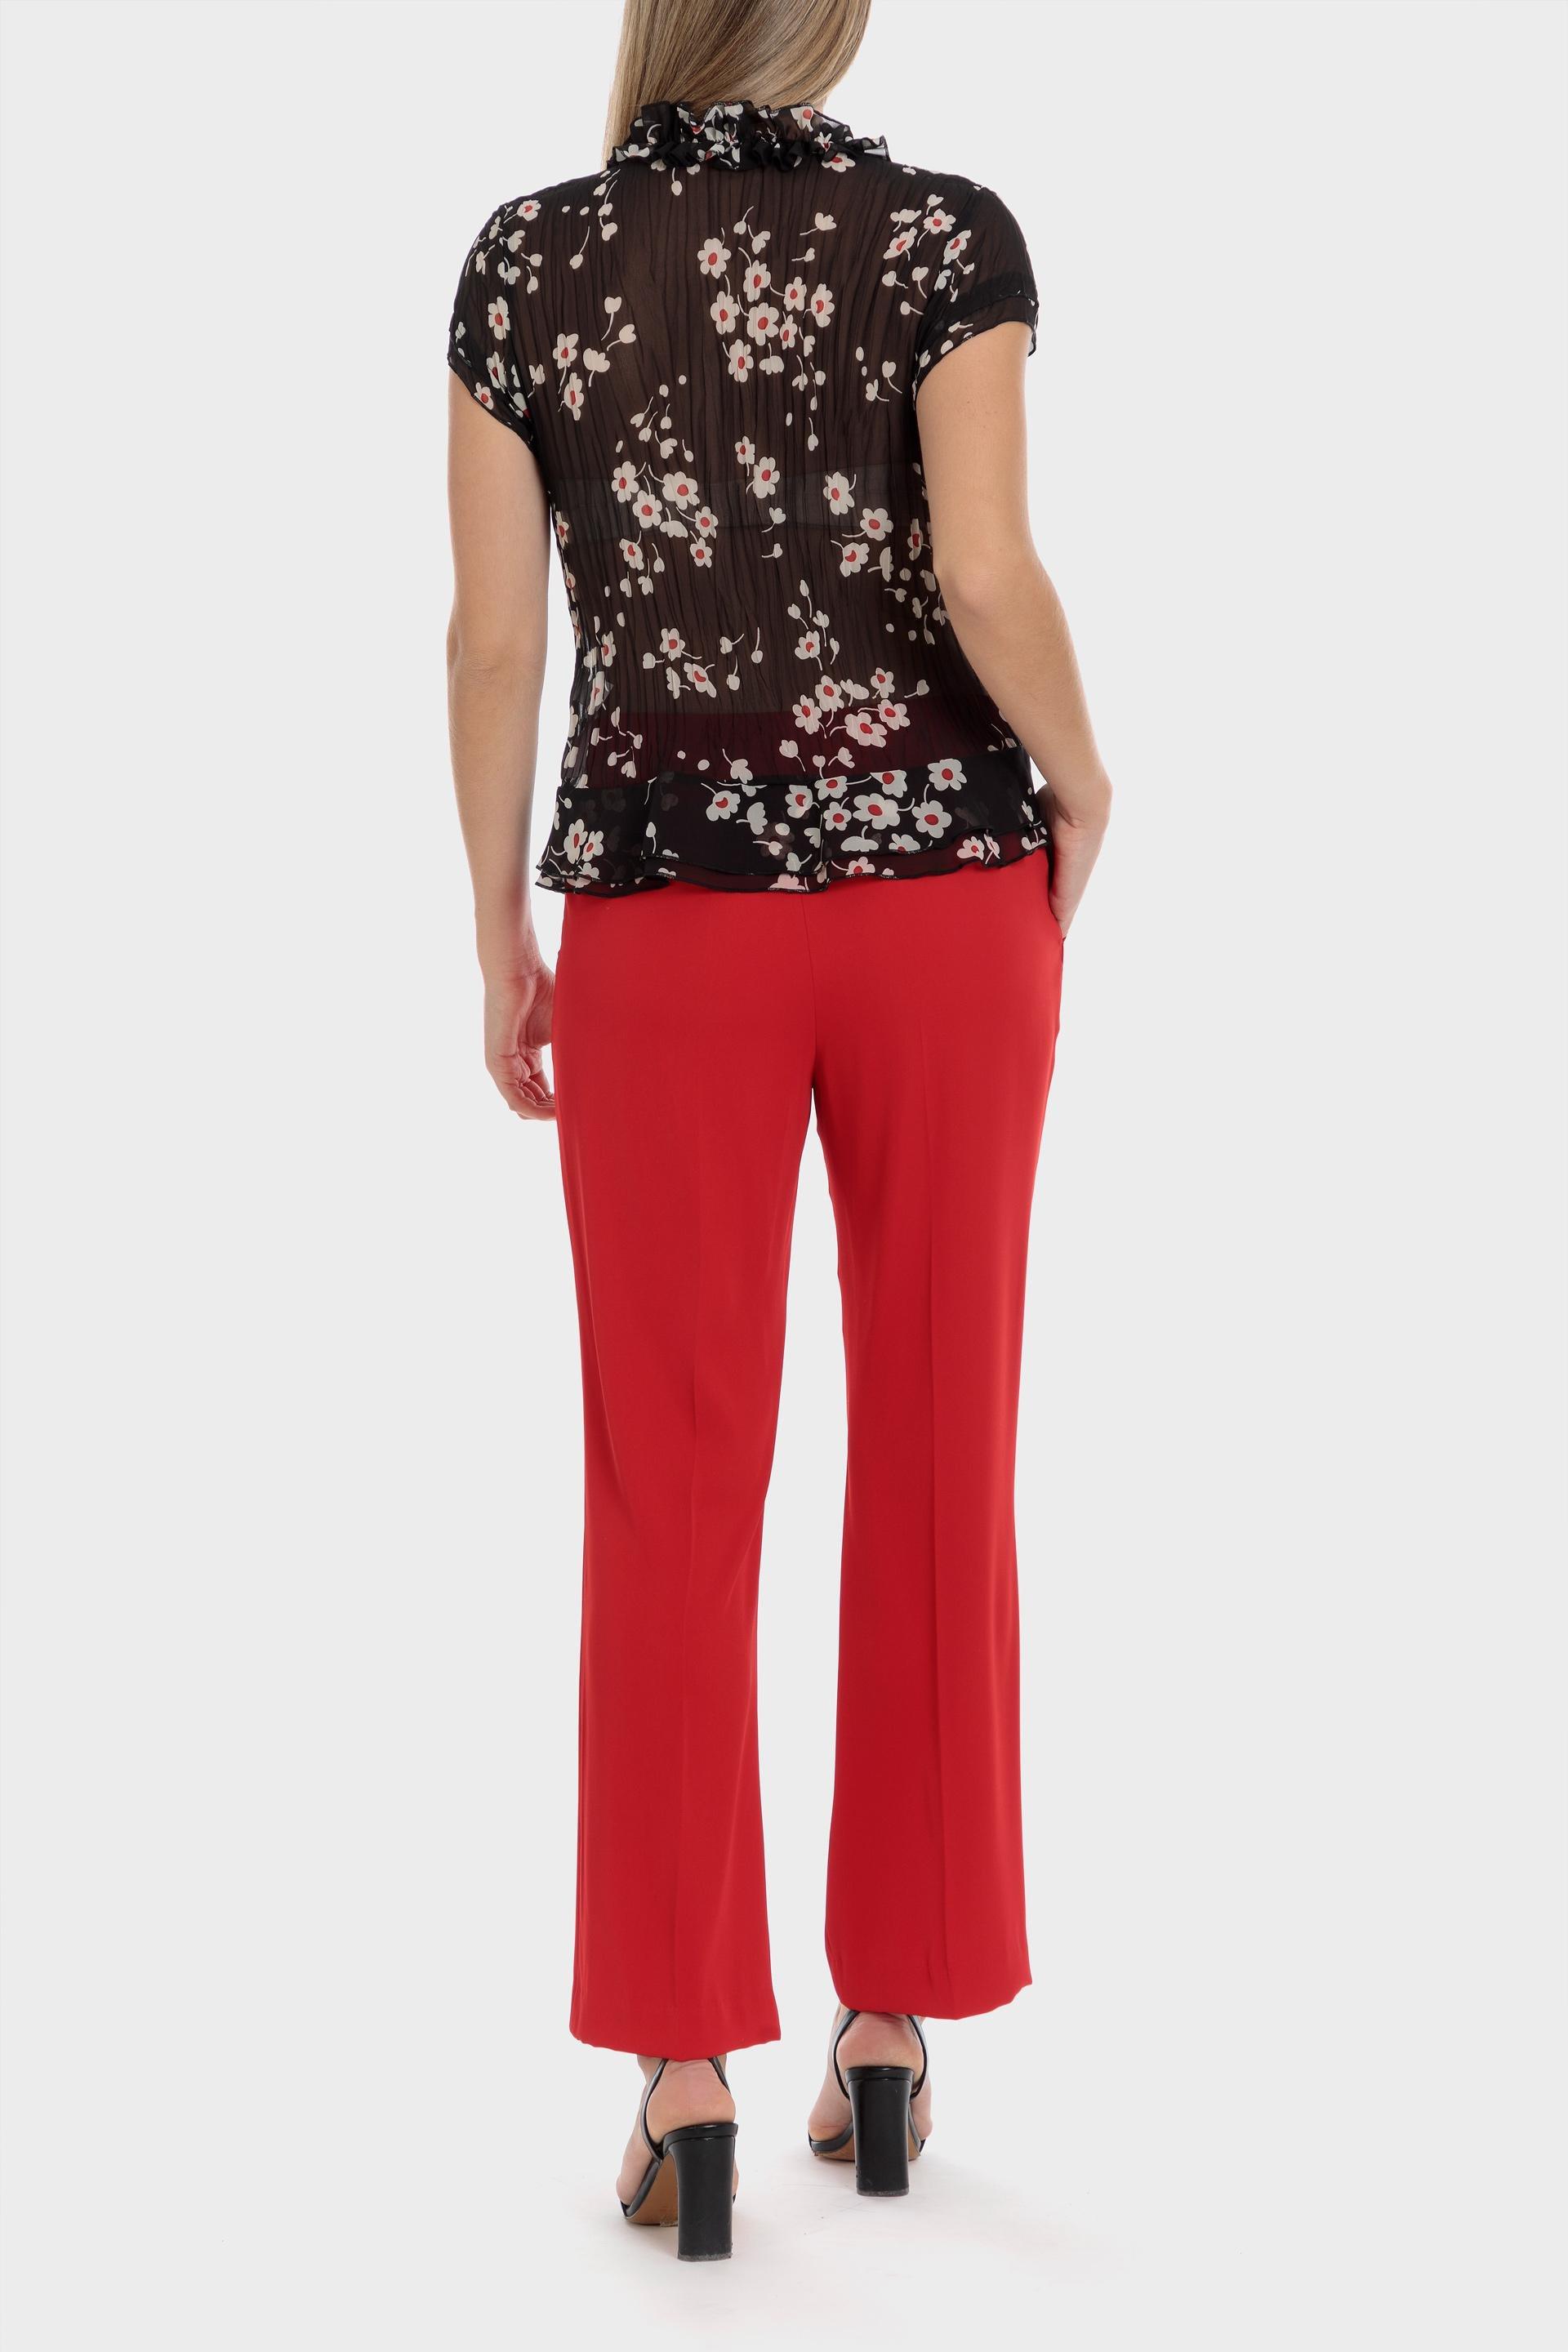 Punt Roma - Red Long Trousers